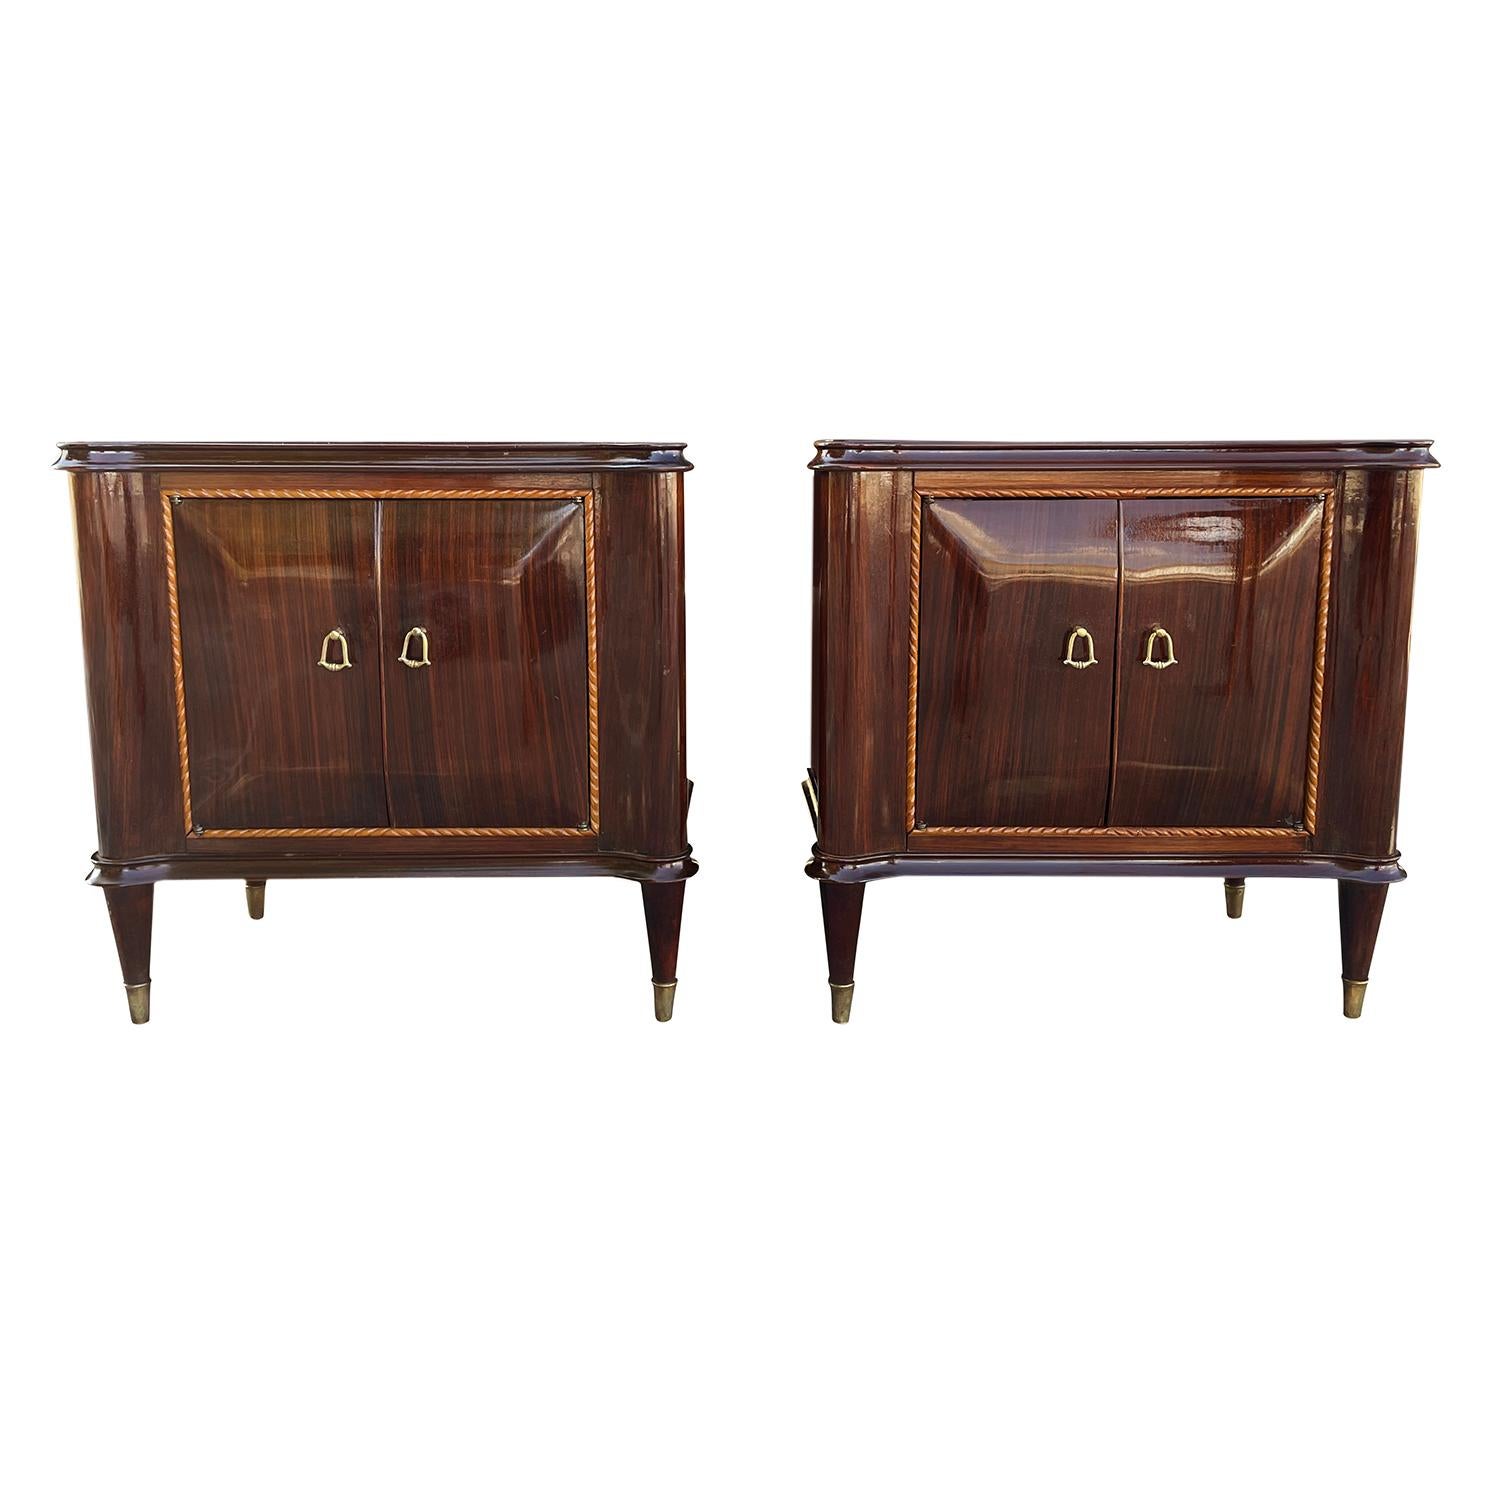 A vintage Mid-Century modern Italian pair of bed side tables made of hand crafted polished, partly veneered Mahogany, designed by Paolo Buffa in good condition. The nightstands are composed with a colored, slightly smoked glass top and two small